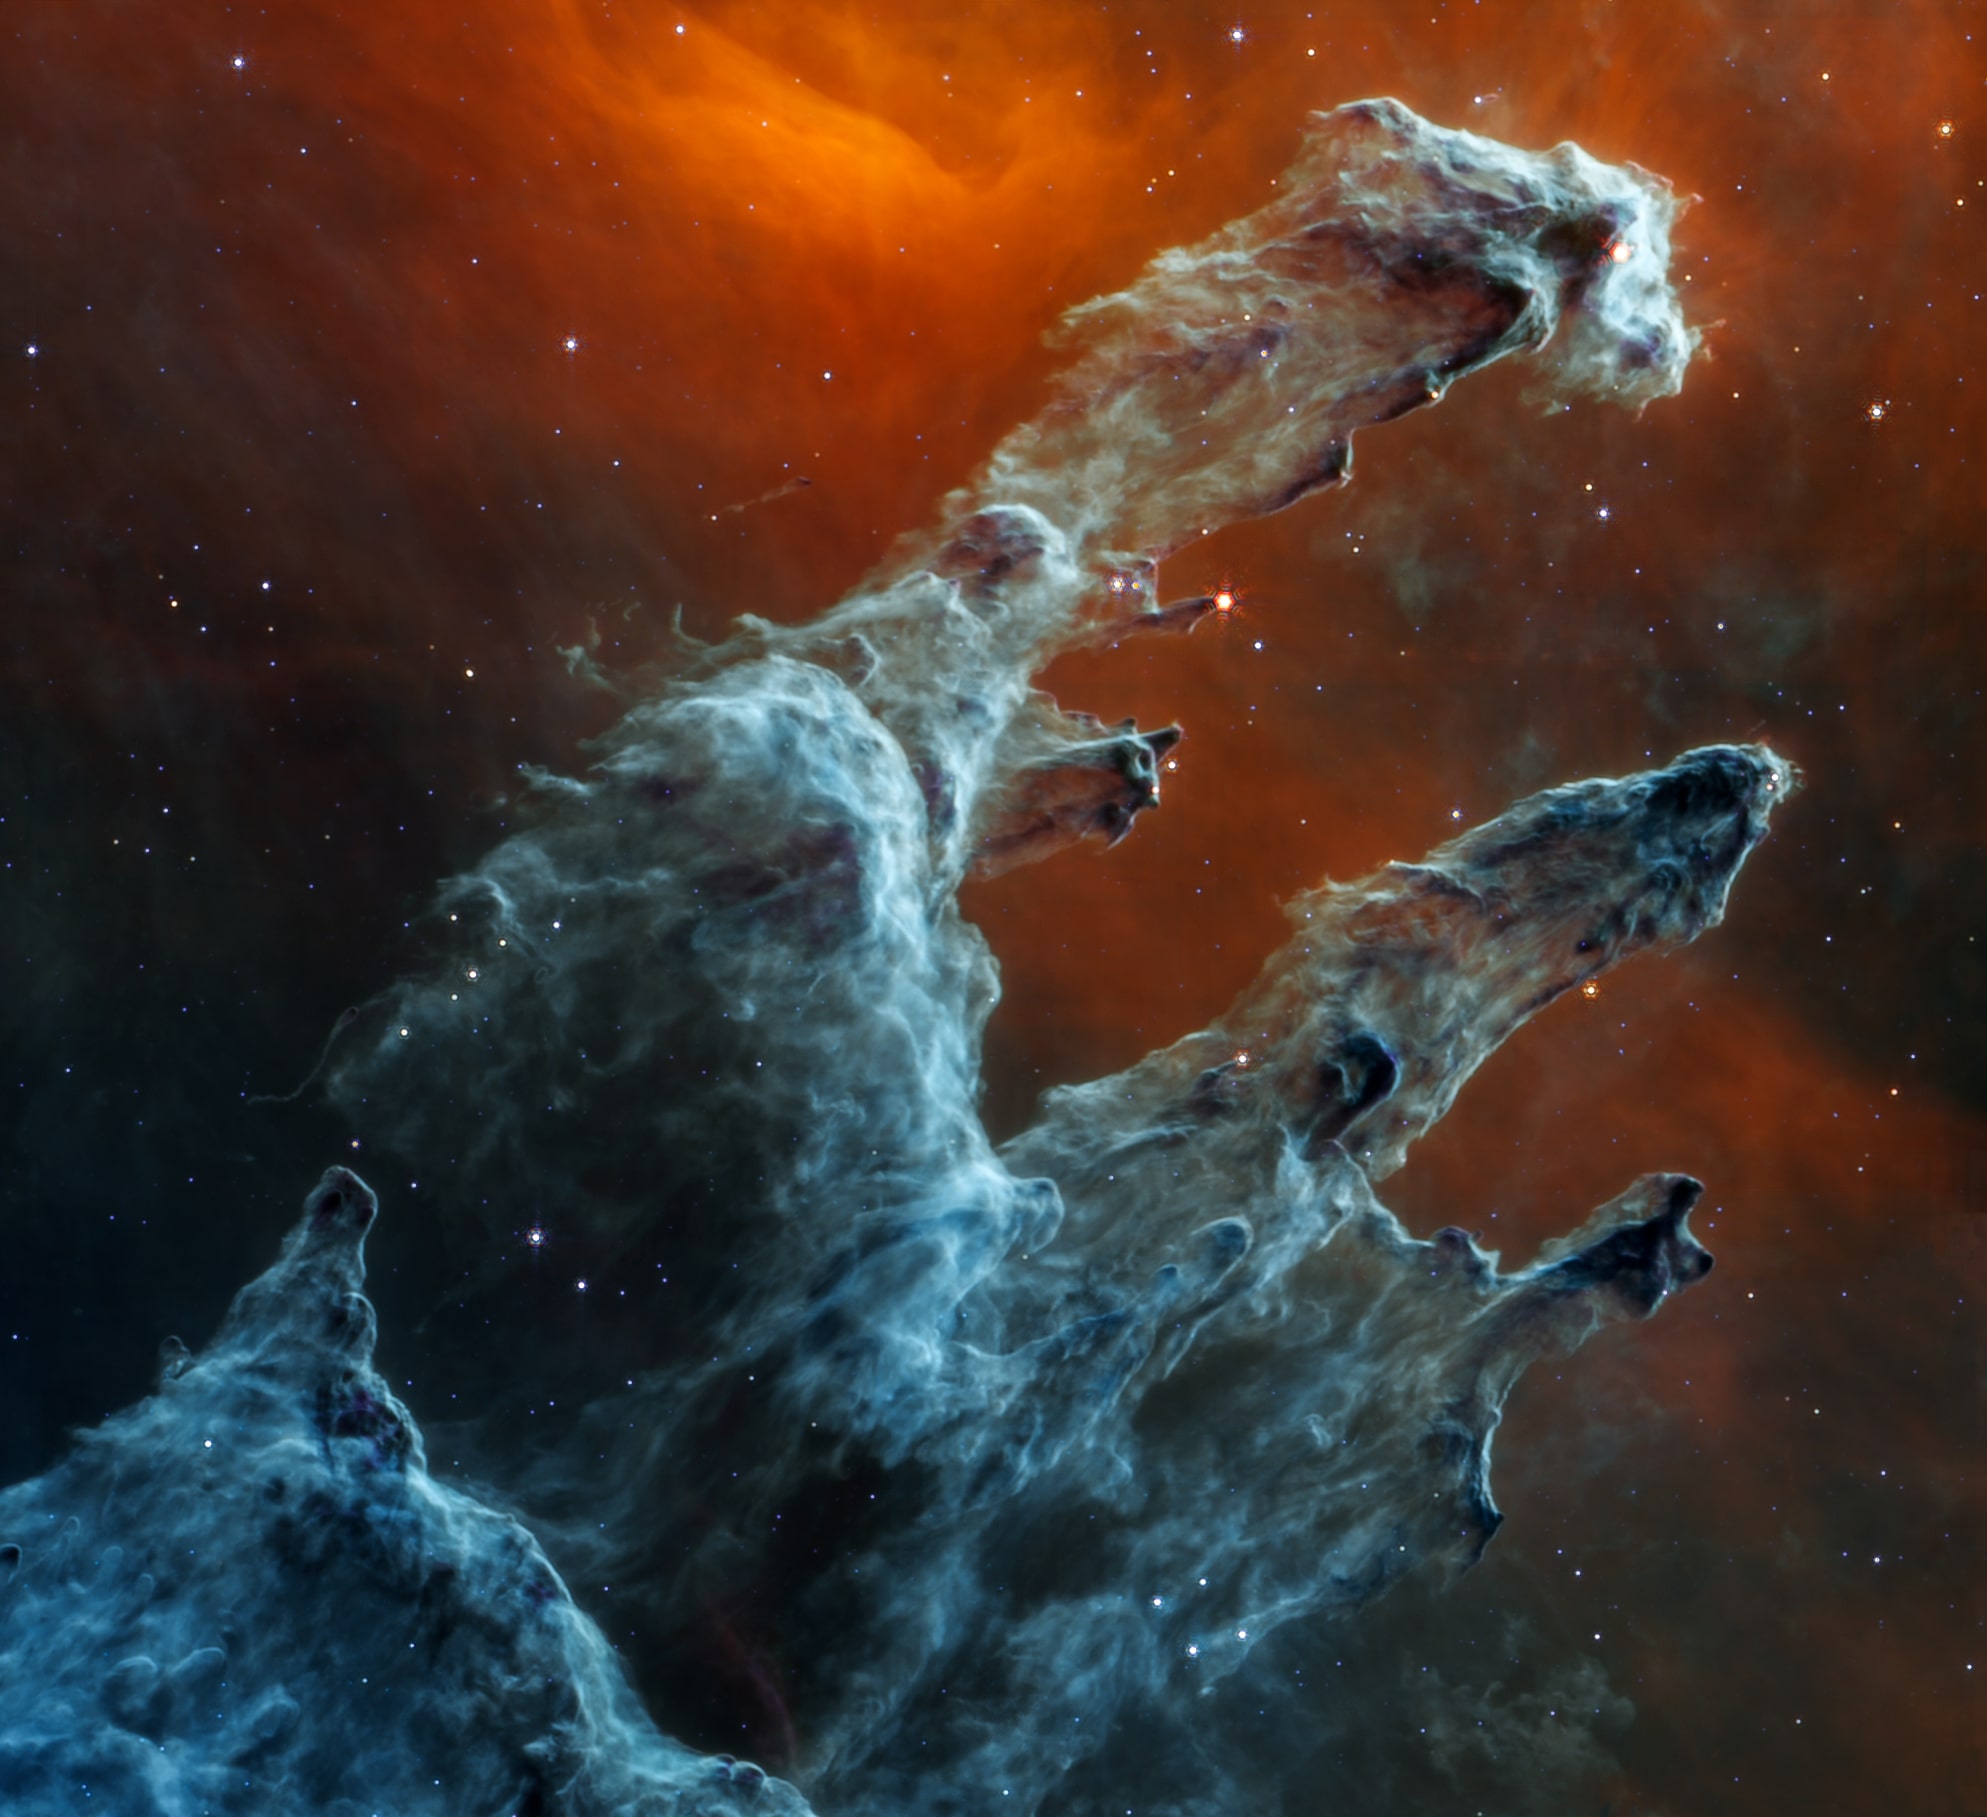 The Pillars of Creation look spooky in new James Webb image